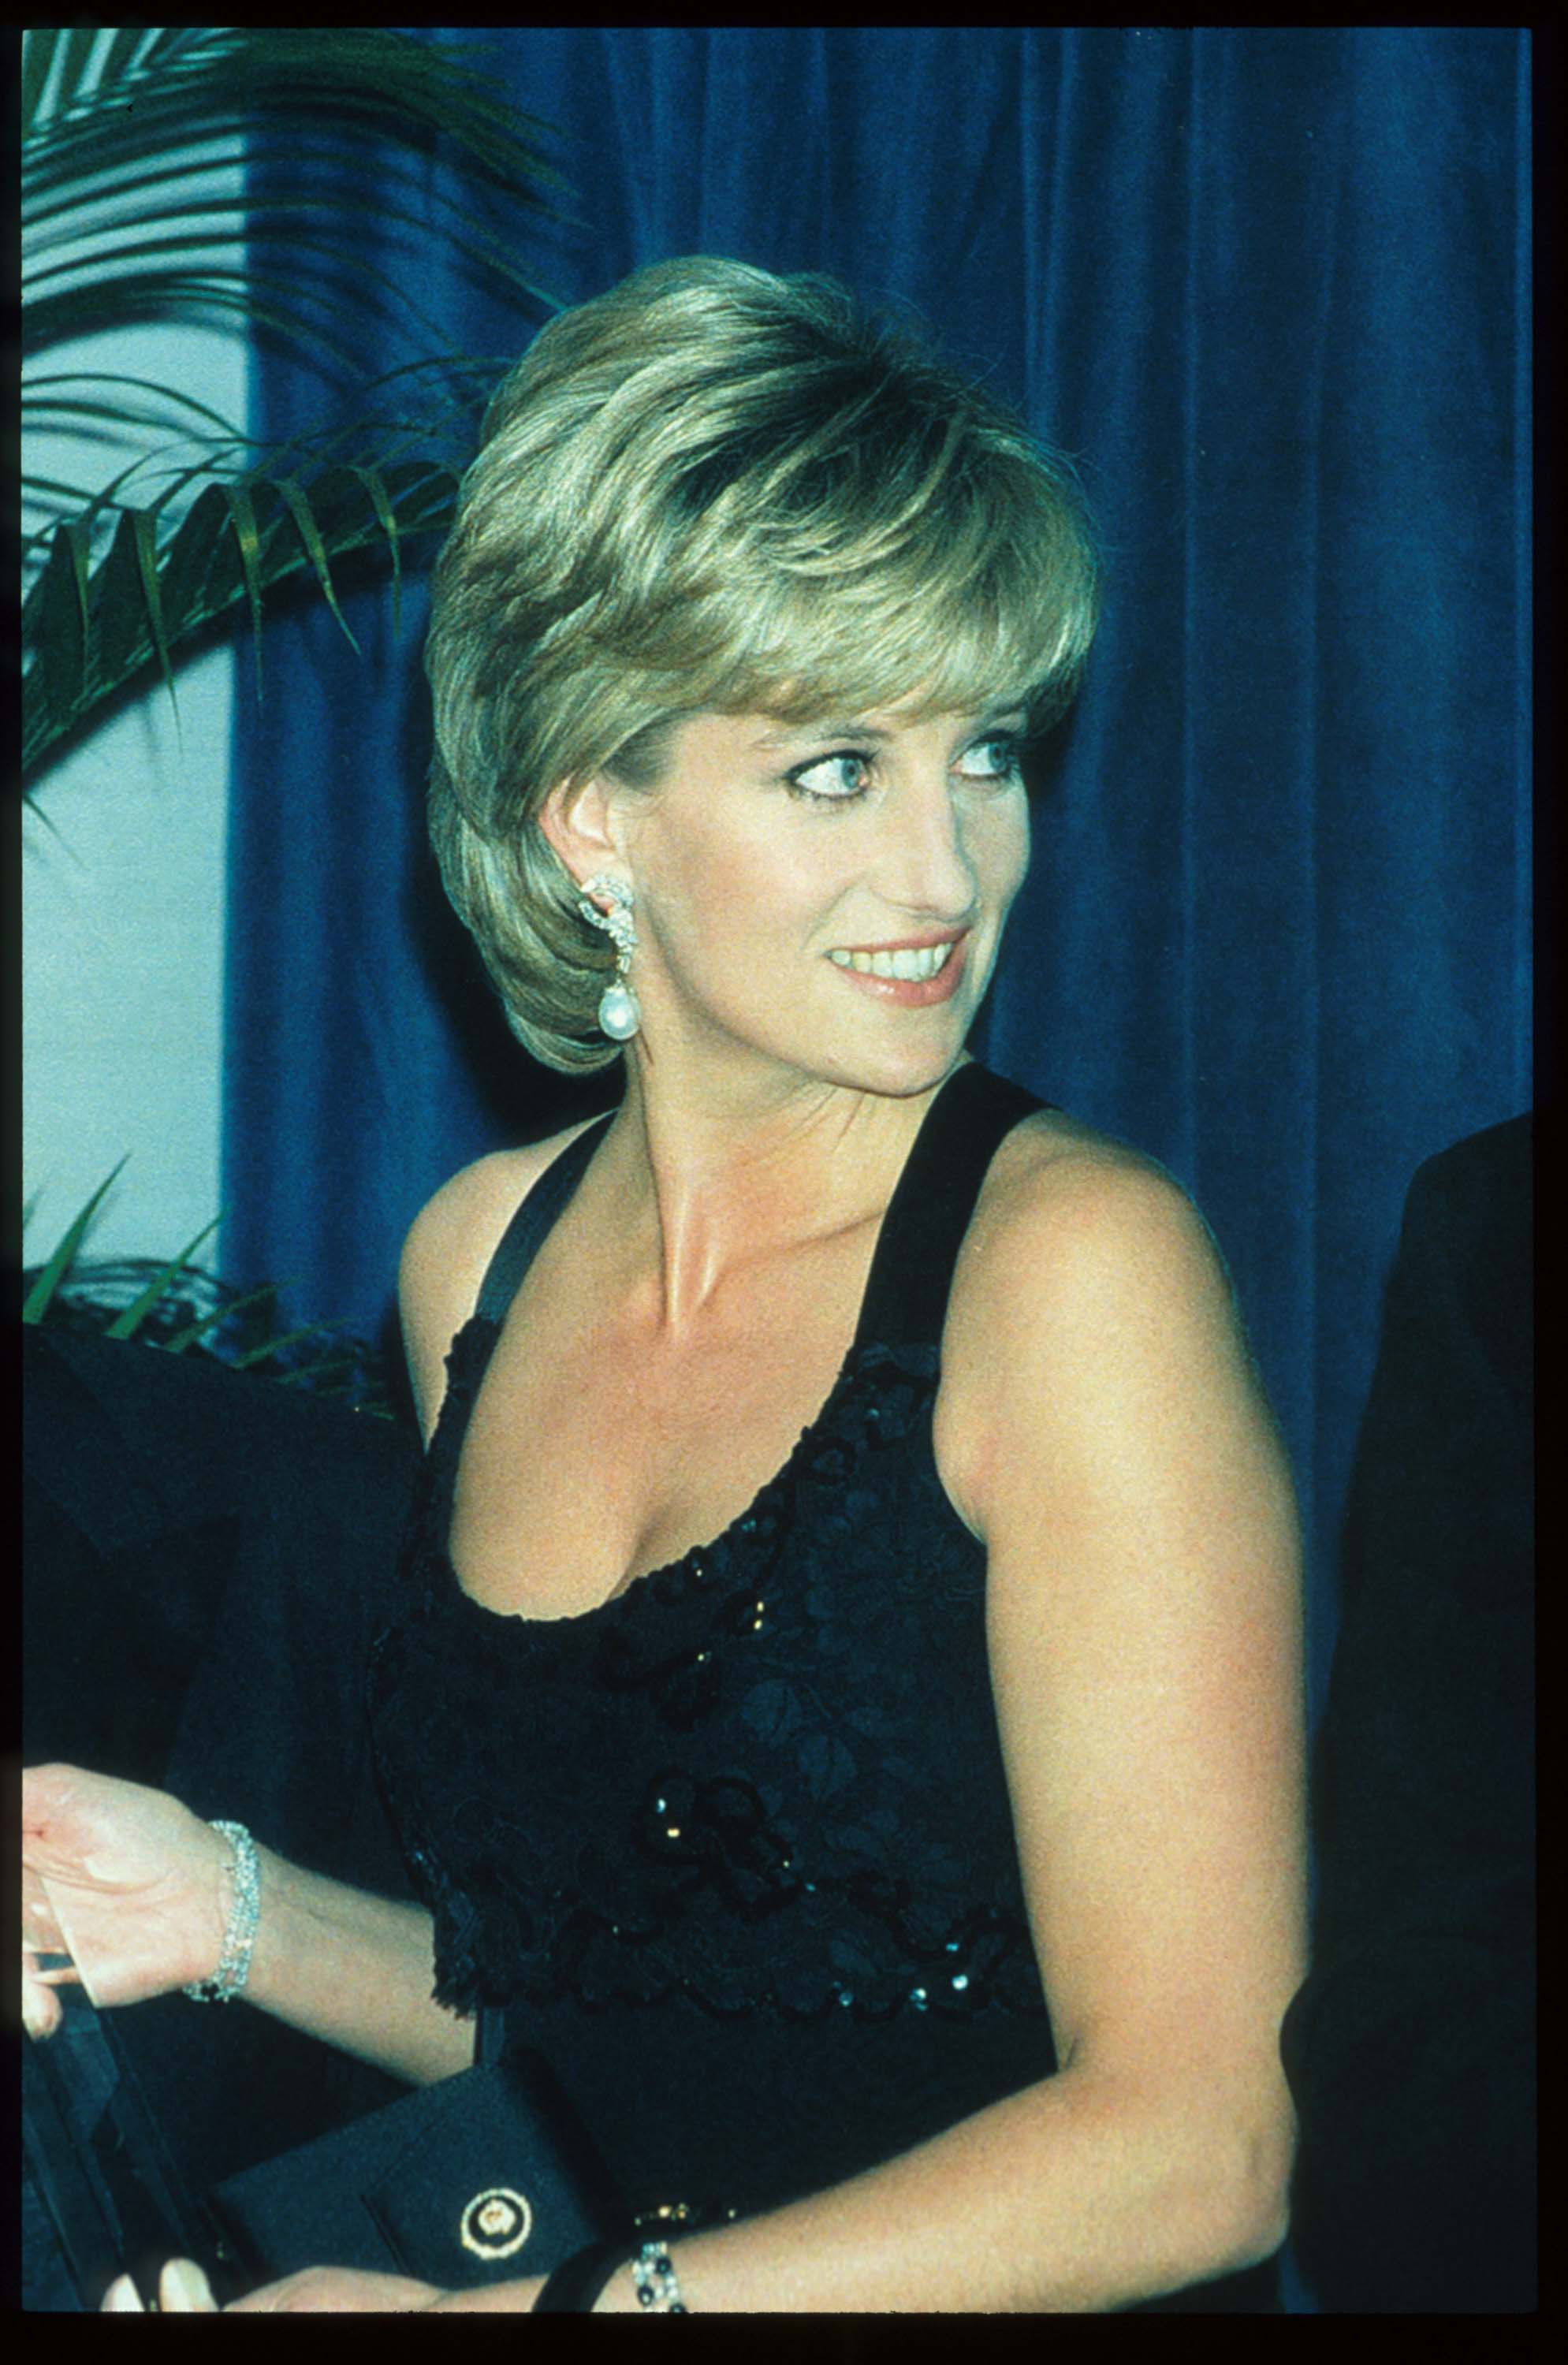 248217 03: Lady Diana Spencer stands at the 41st annual United Cerebral Palsy Awards gala December 11, 1995 in New York City. Lady Diana, the Princess of Wales, received the UCP Humanitarian Award at the fundraising evening. (Photo by Pool/Liaison)